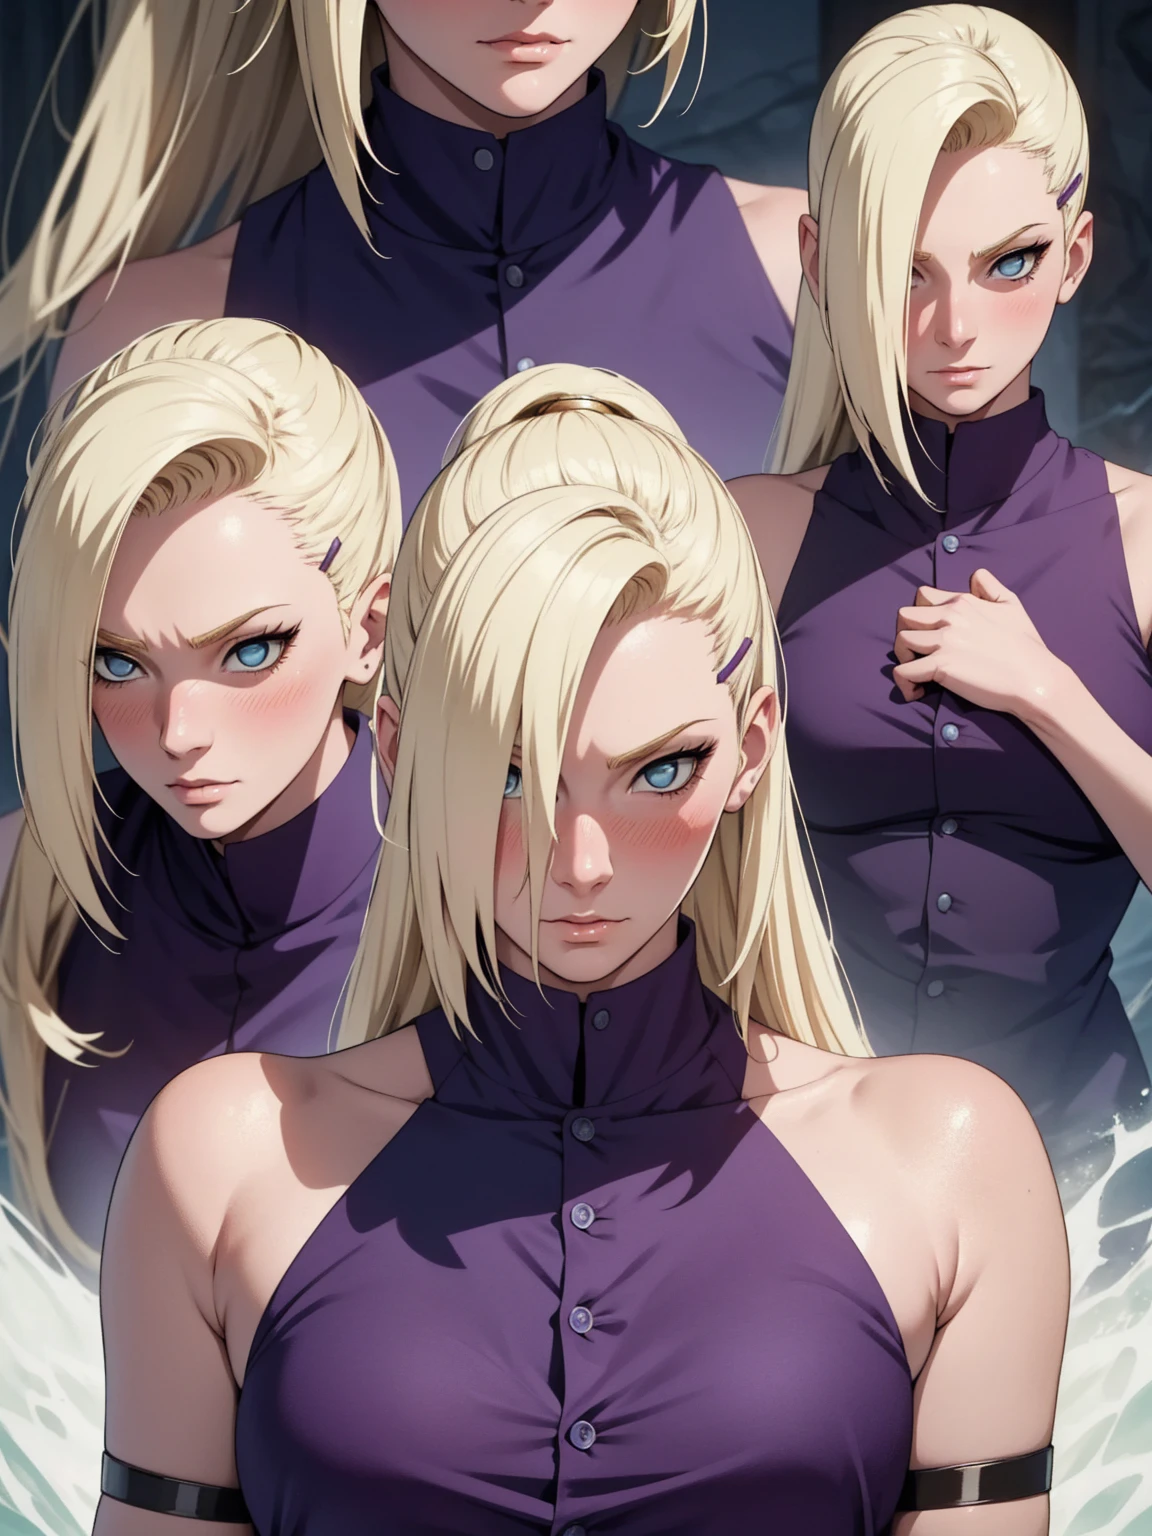 {-erro_de_anatomia:1.0} estilo anime, Masterpiece, absurdities, Yamanaka Ino\(Naruto\), 1girl Solo, woman, Perfect composition, Detailed lips, Beautiful face, body proportion, Blush, Long blonde hair, blue eyes, purple blouse, purple pant, Soft gauze, Super realistic, Detailed, photo shoot, Realistic faces and bodies, masterpiece, best quality, best illustration, hyper detailed, 1 woman, solo, glamorous, blushing, upper body, fighting, on nature, look at the view, dimanic poses,